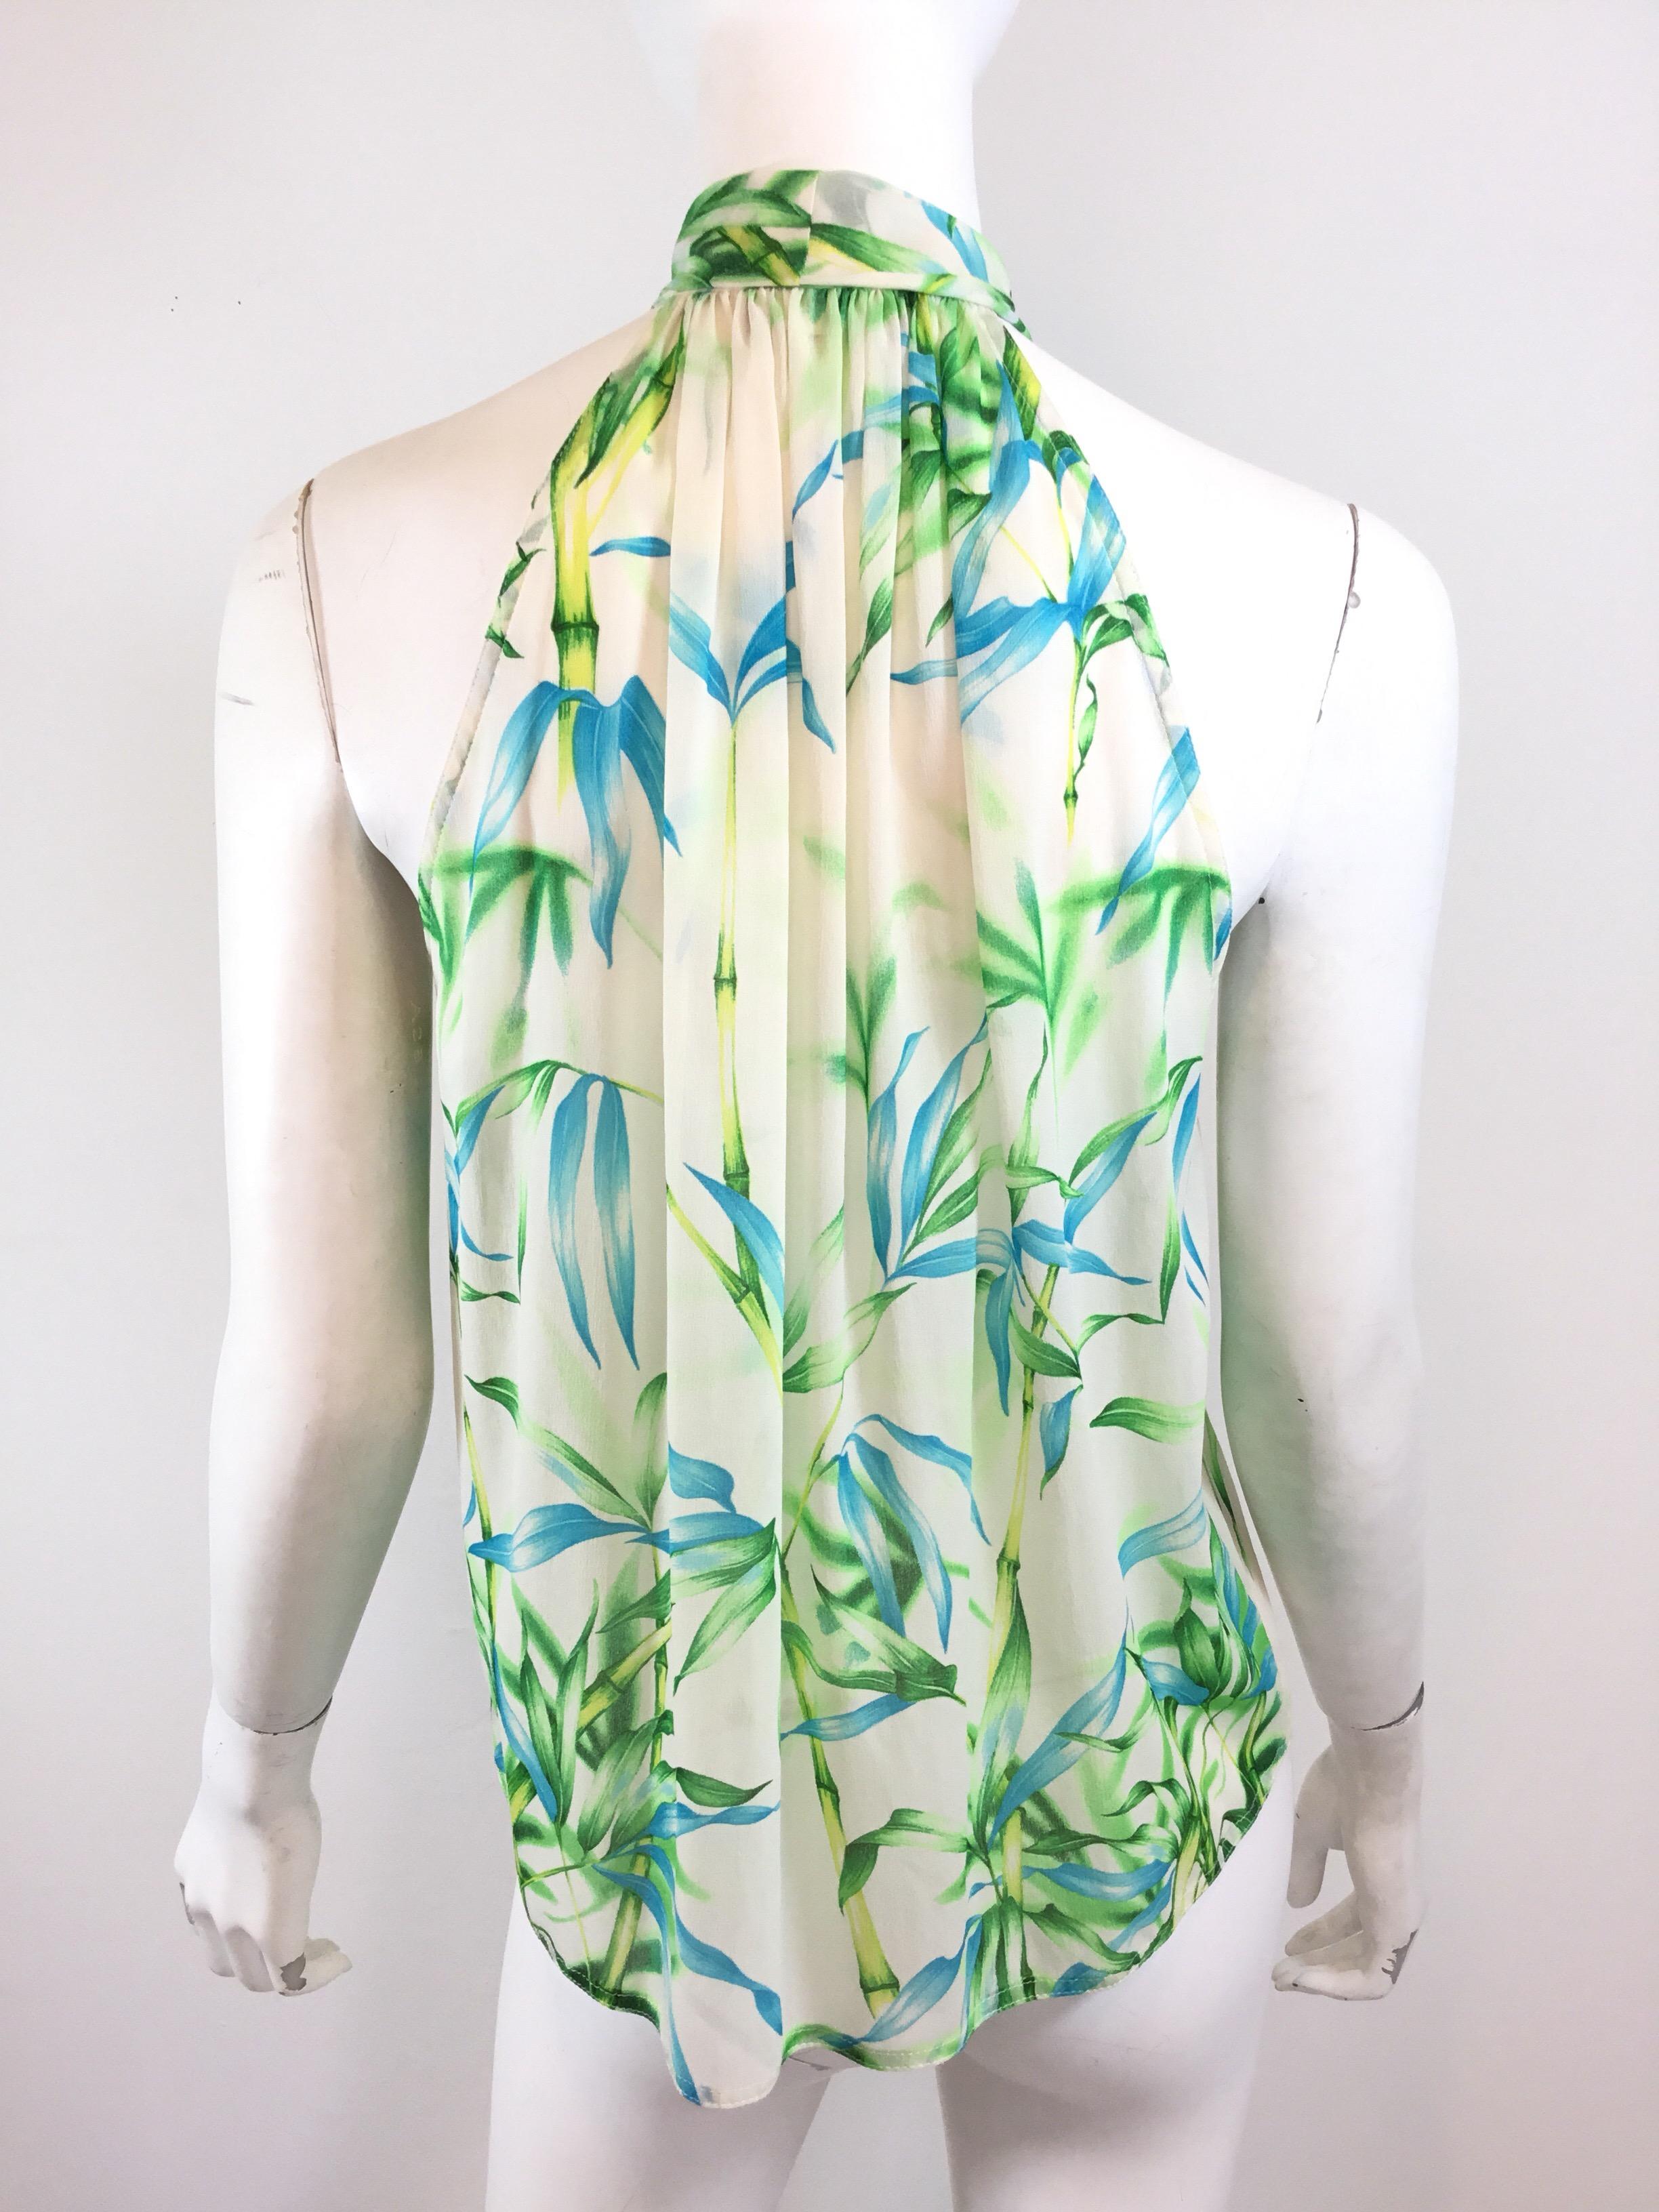 Green Gianni Versace Silk Print Blouse with Neck Tie